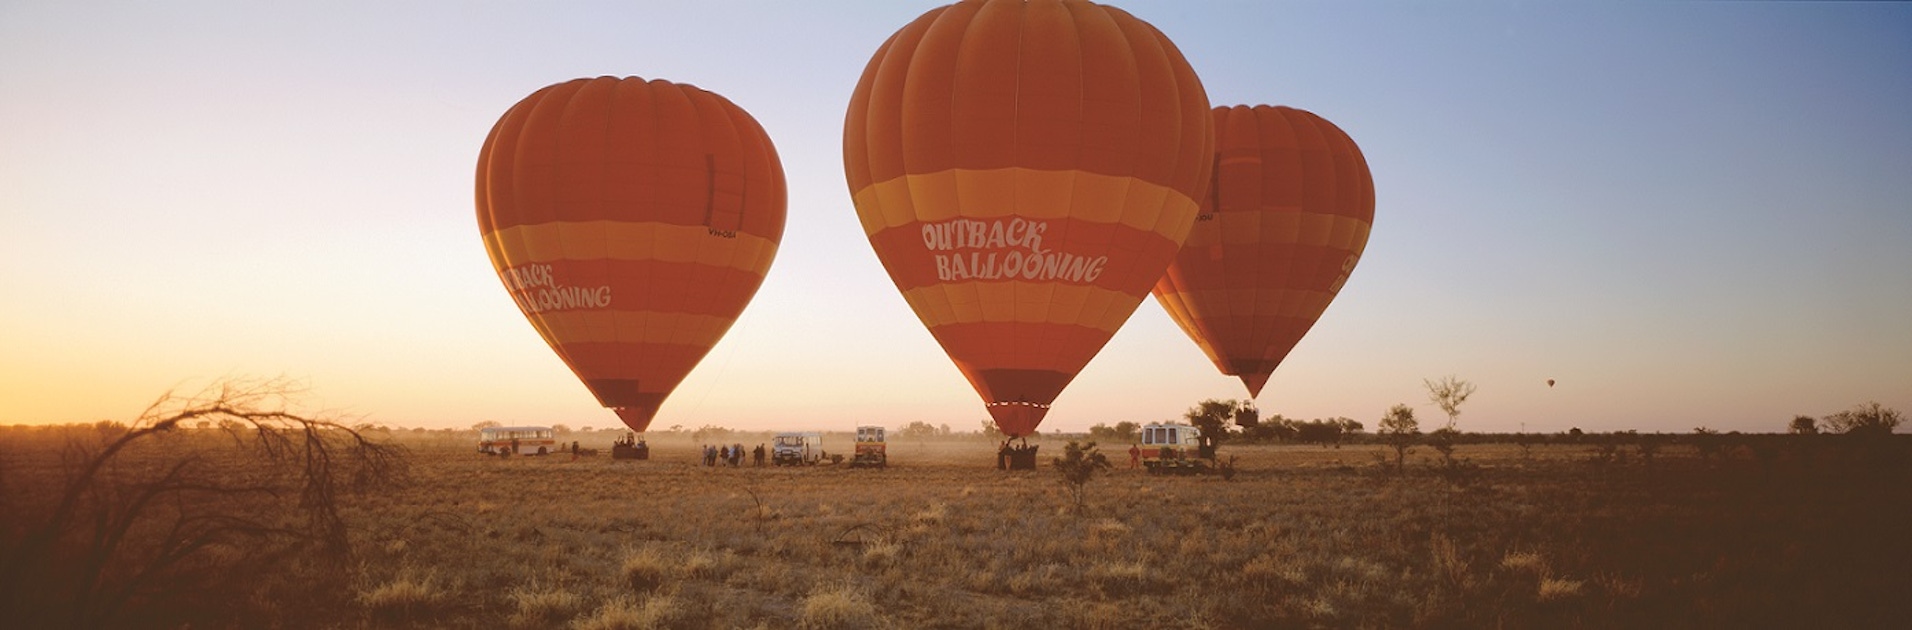 Hot air balloon rides in Alice Springs  musement